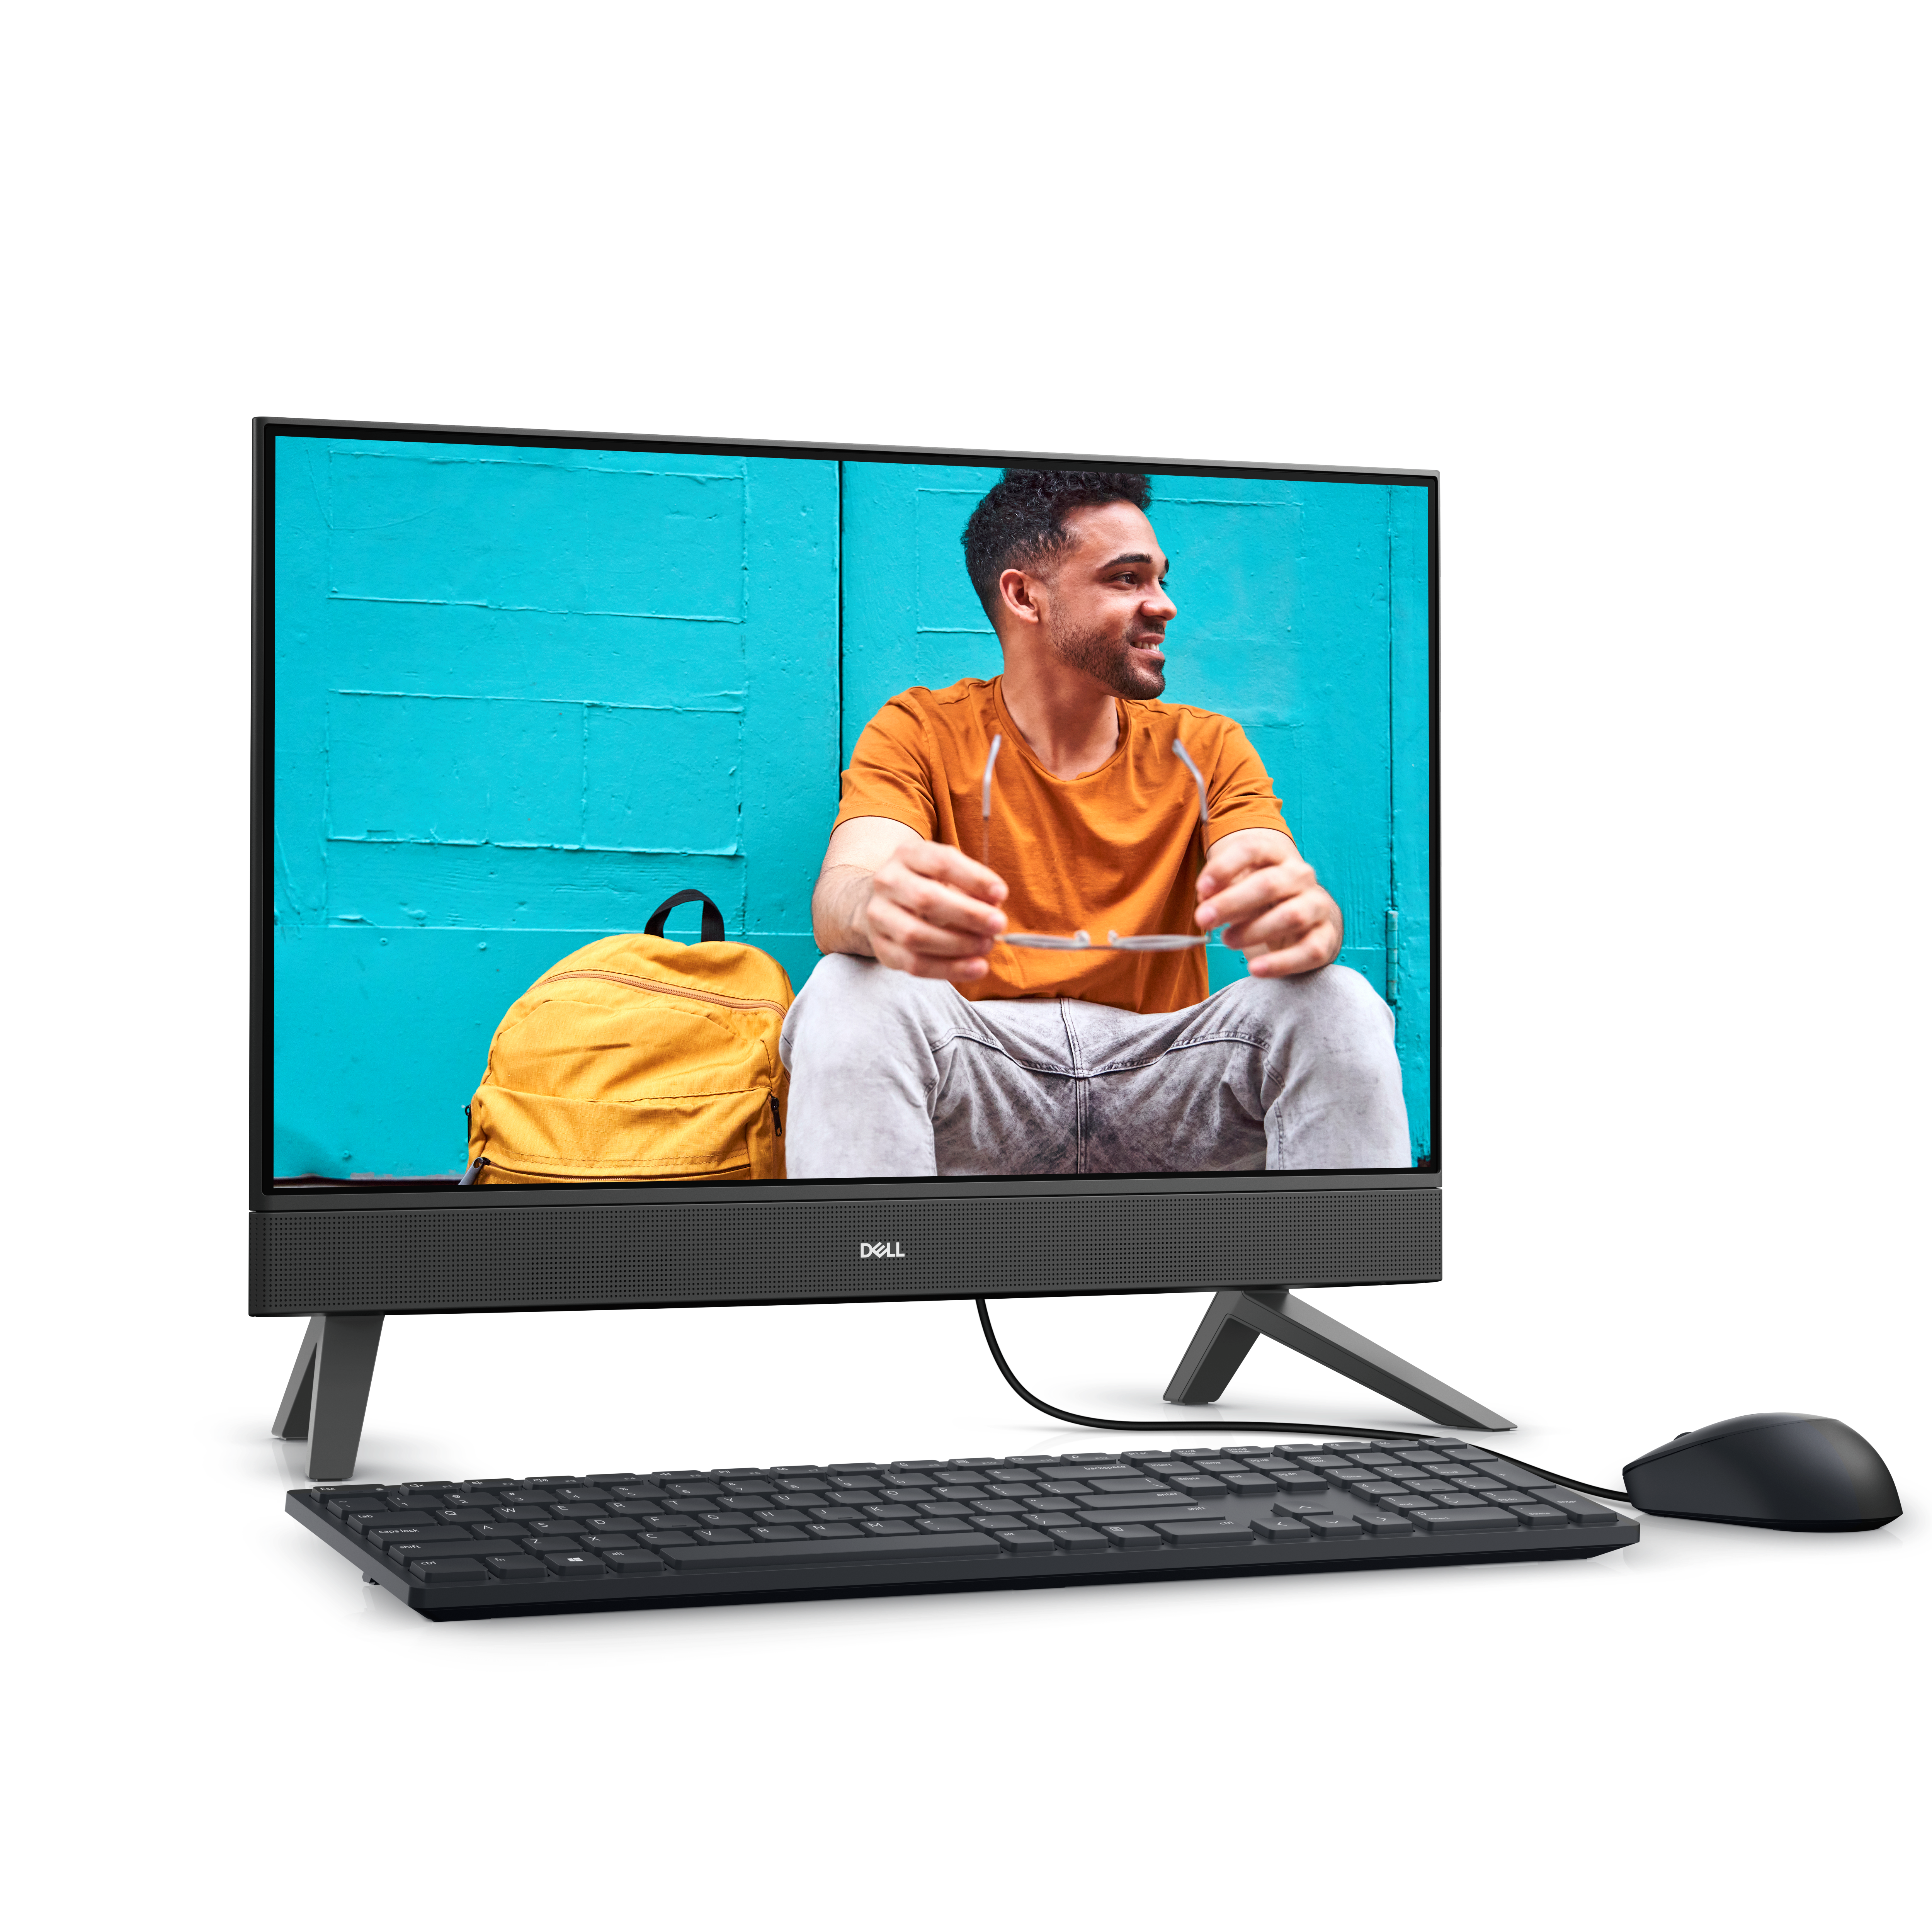 Dell Inspiron 24 5415 All-in-One 22年モデル - ノートPC